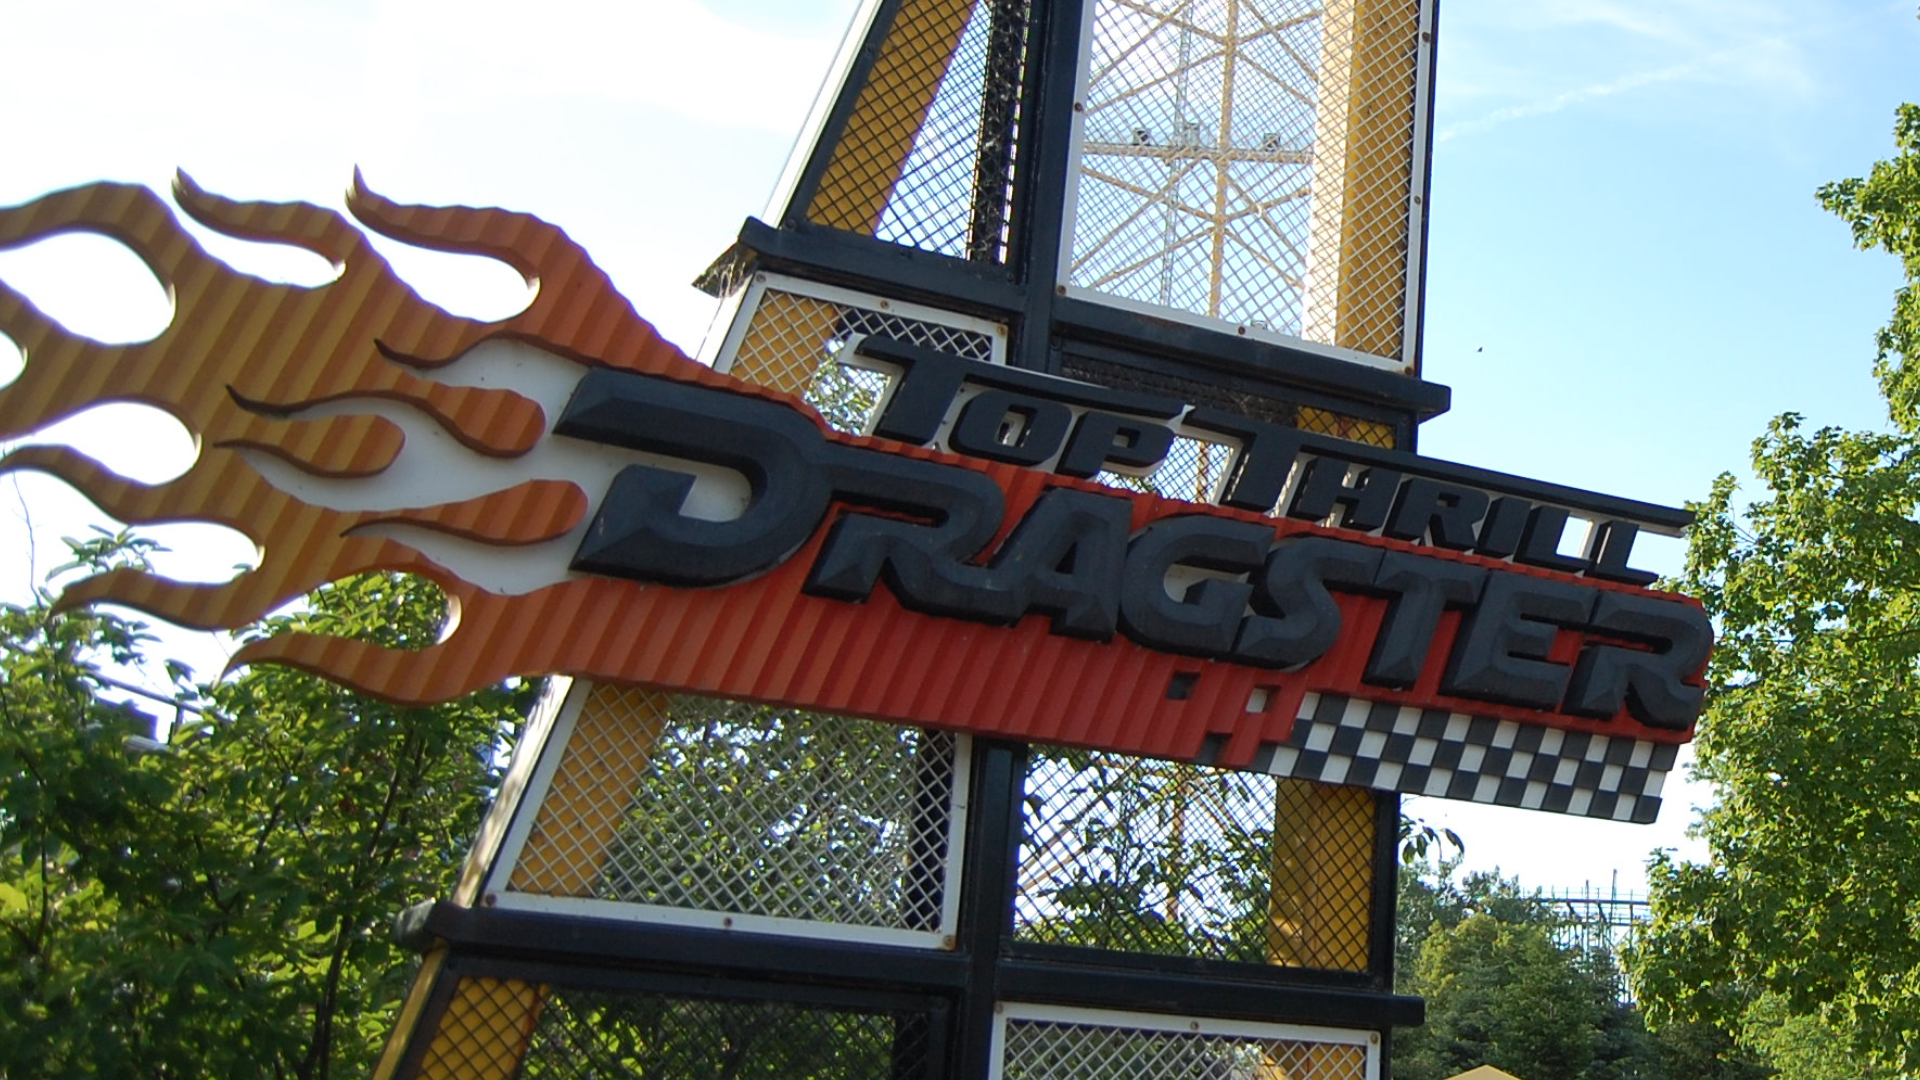 "After 19 seasons in operation with 18 million riders experiencing the world’s first strata coaster, Top Thrill Dragster, as you know it, is being retired."